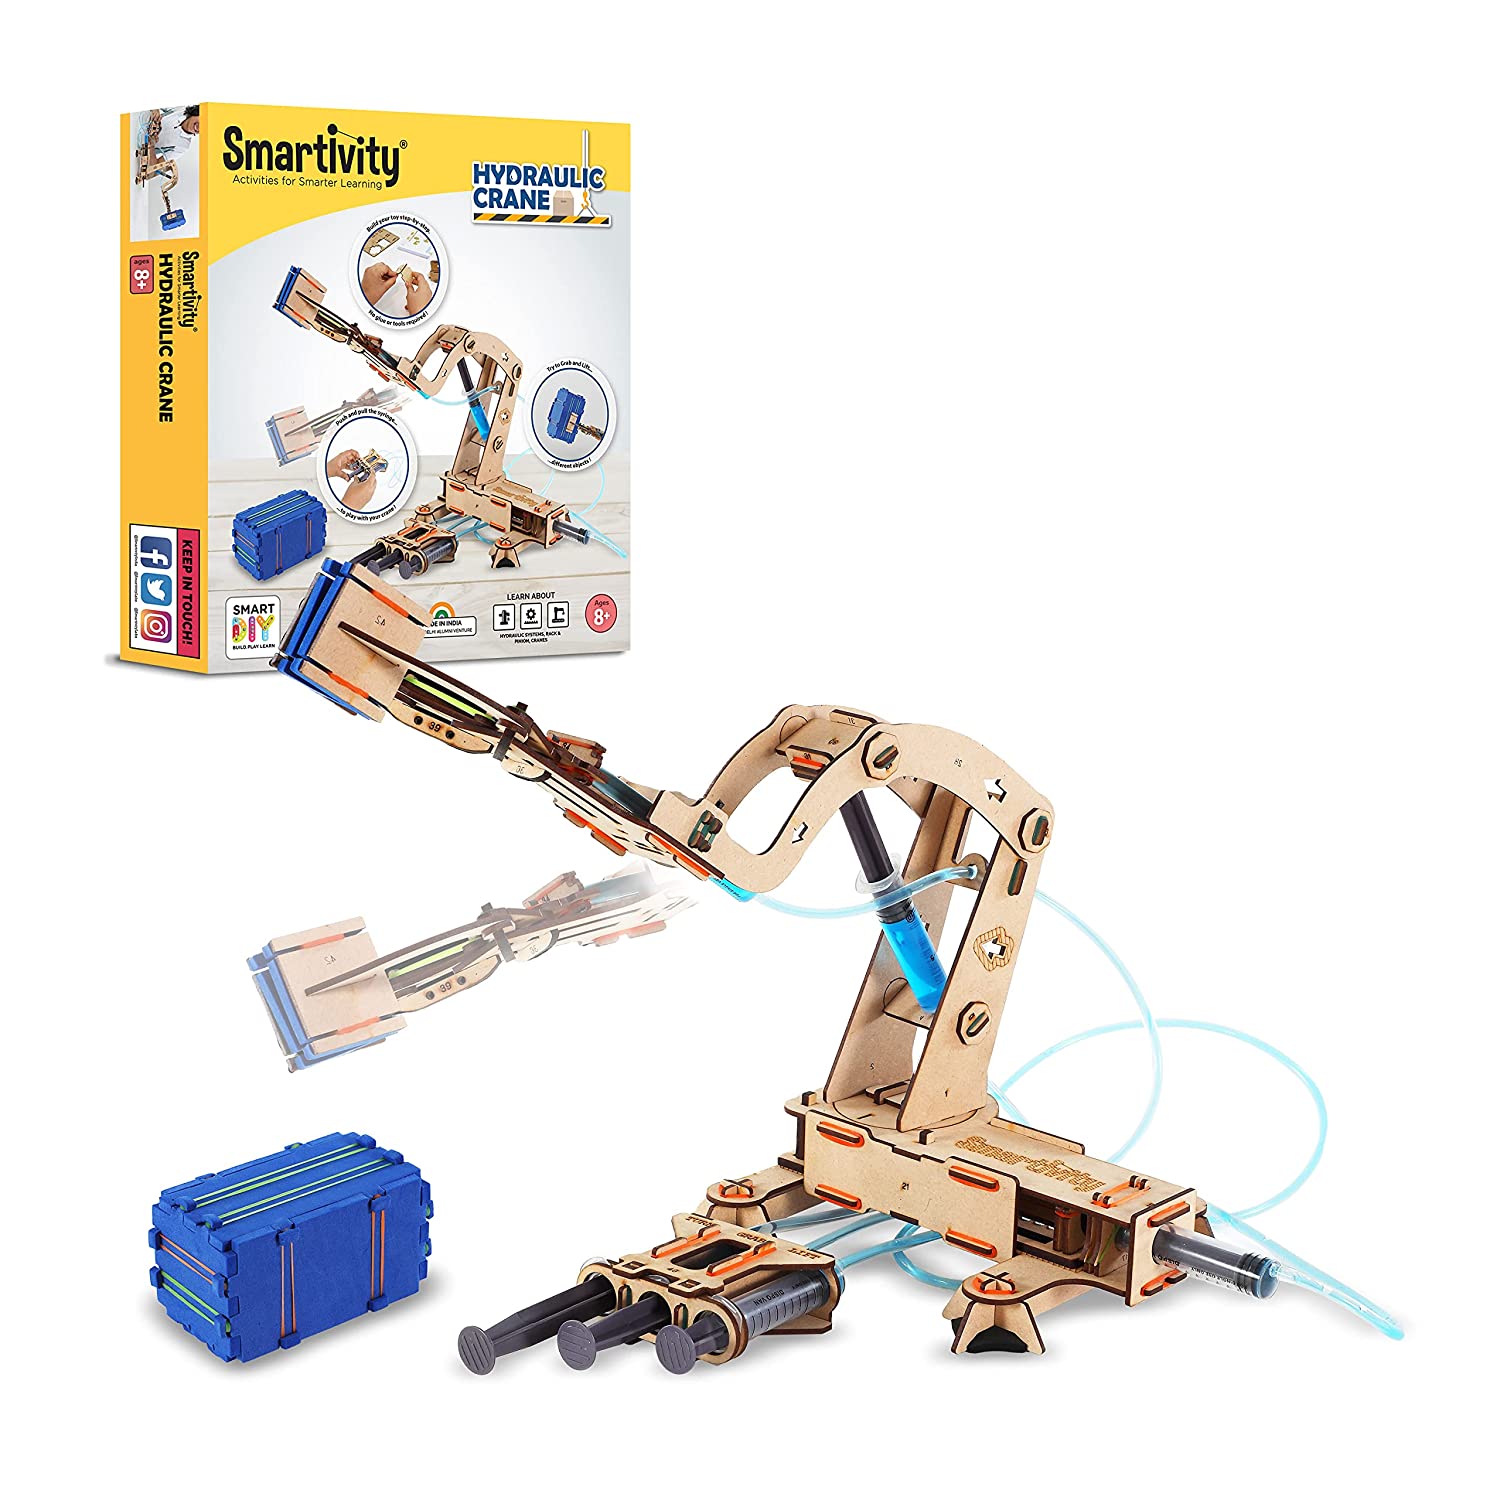 Smartivity Hydraulic Toy Crane for Kids and Infants